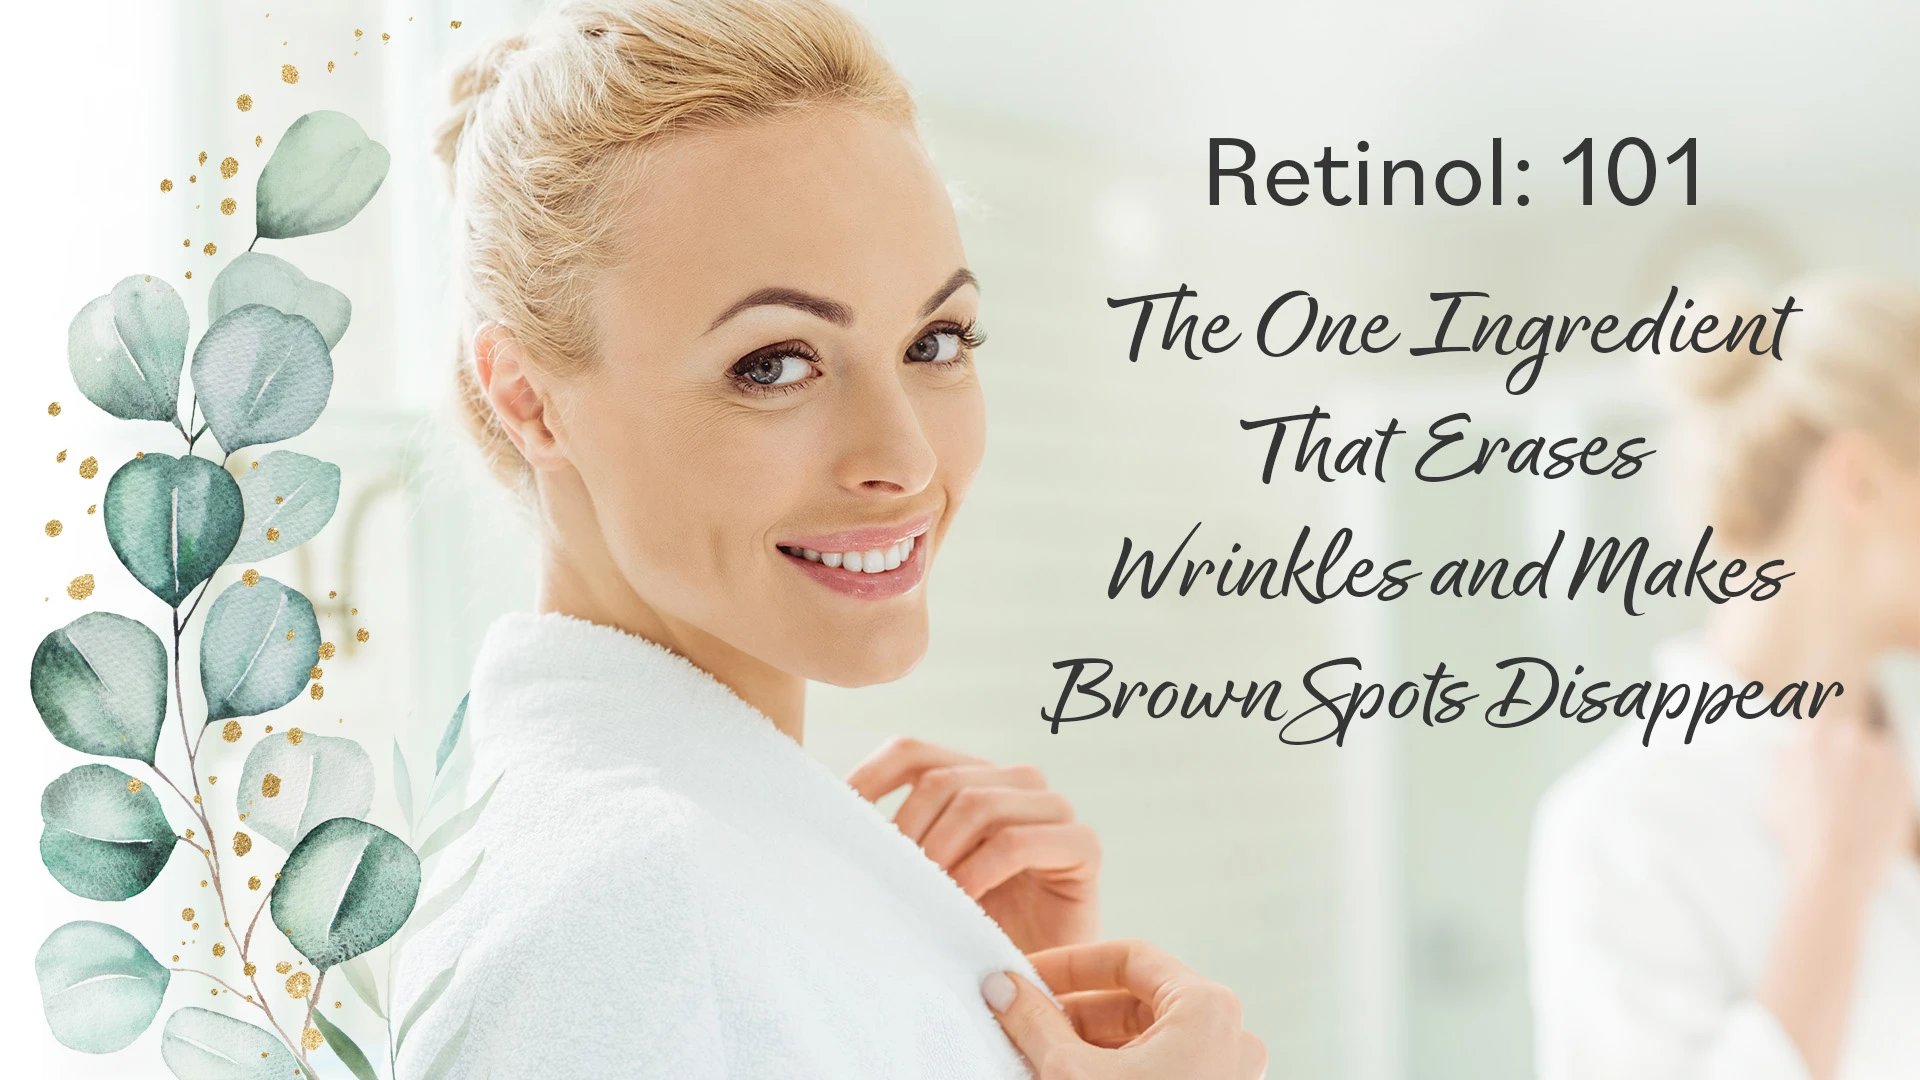 Retinol: 101. The One Ingredient That Erases Wrinkles and Makes Brown Spots Disappear